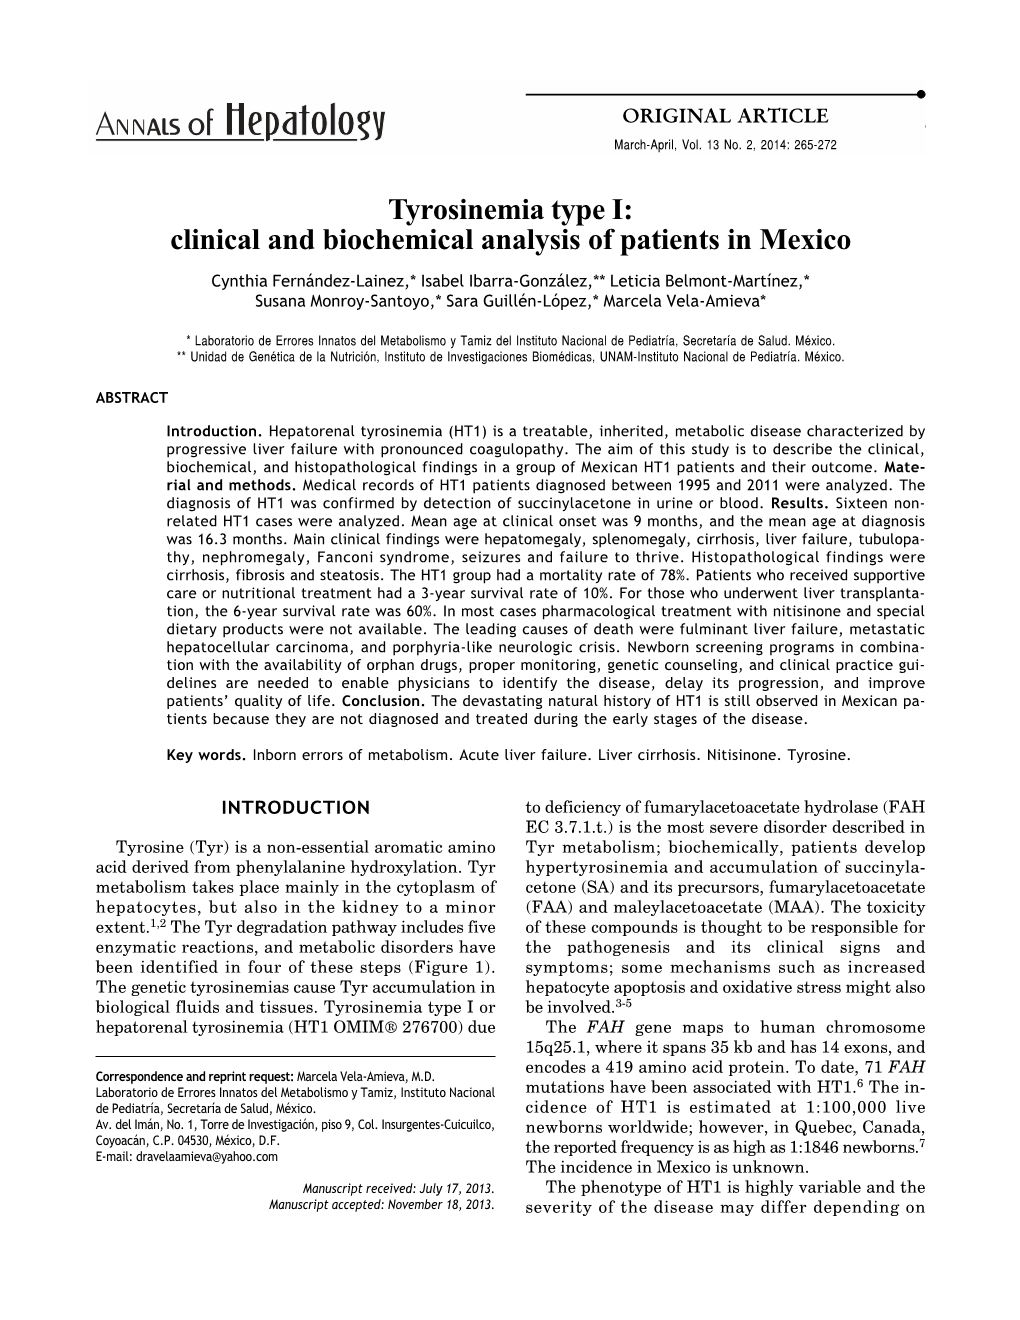 Tyrosinemia Type I: Clinical and Biochemical Analysis of Patients in Mexico